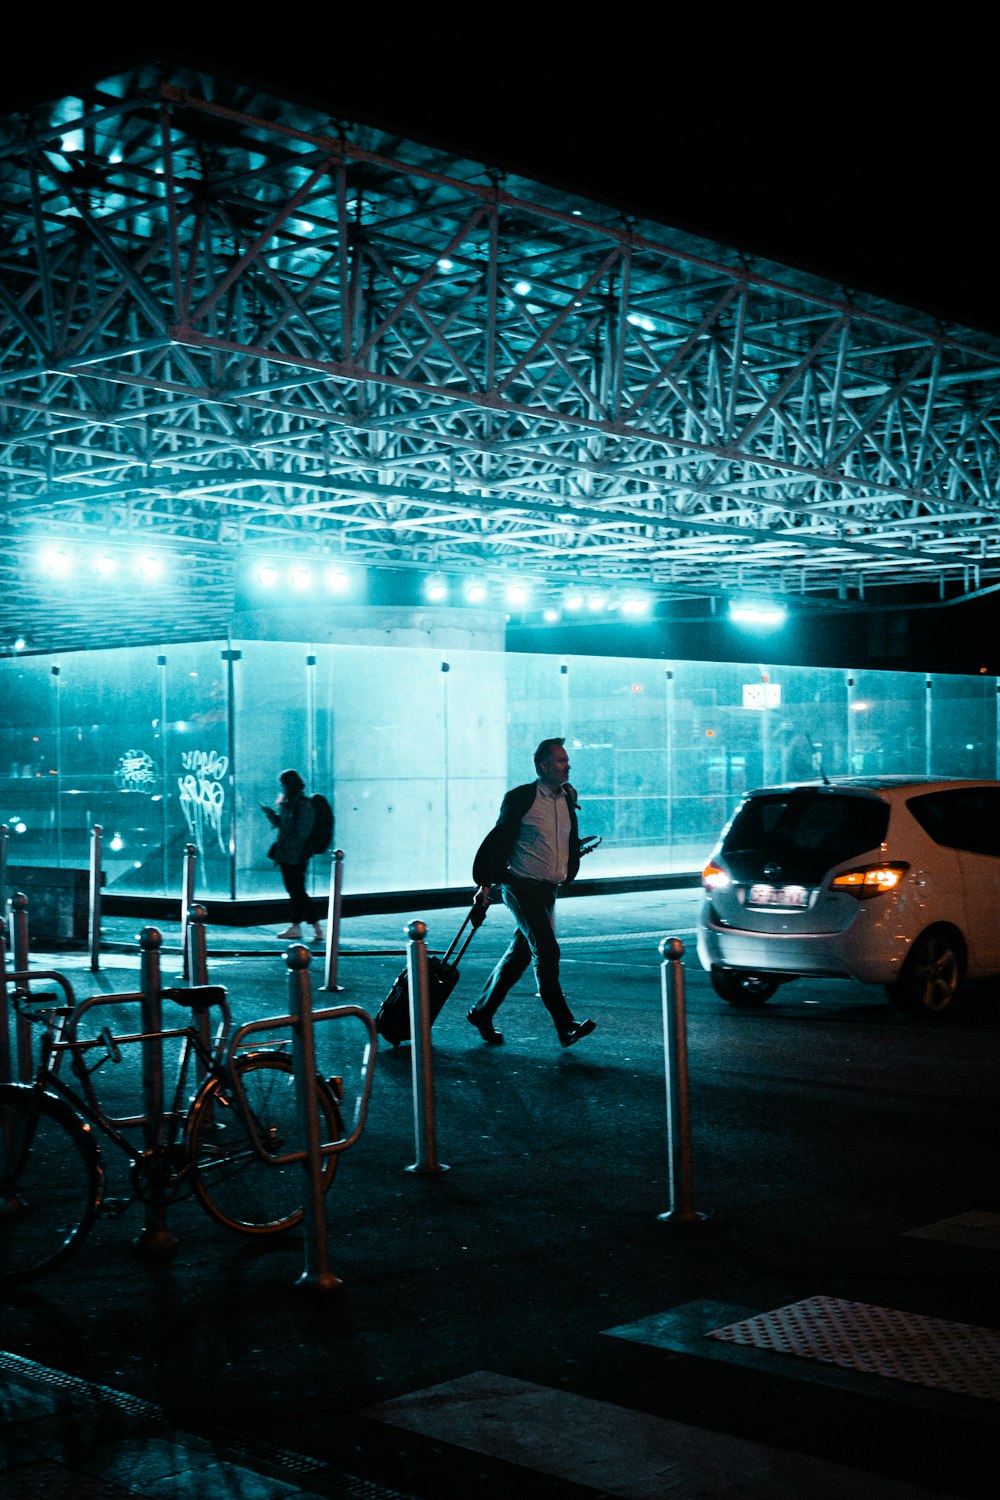 a couple of people walking down a street at night